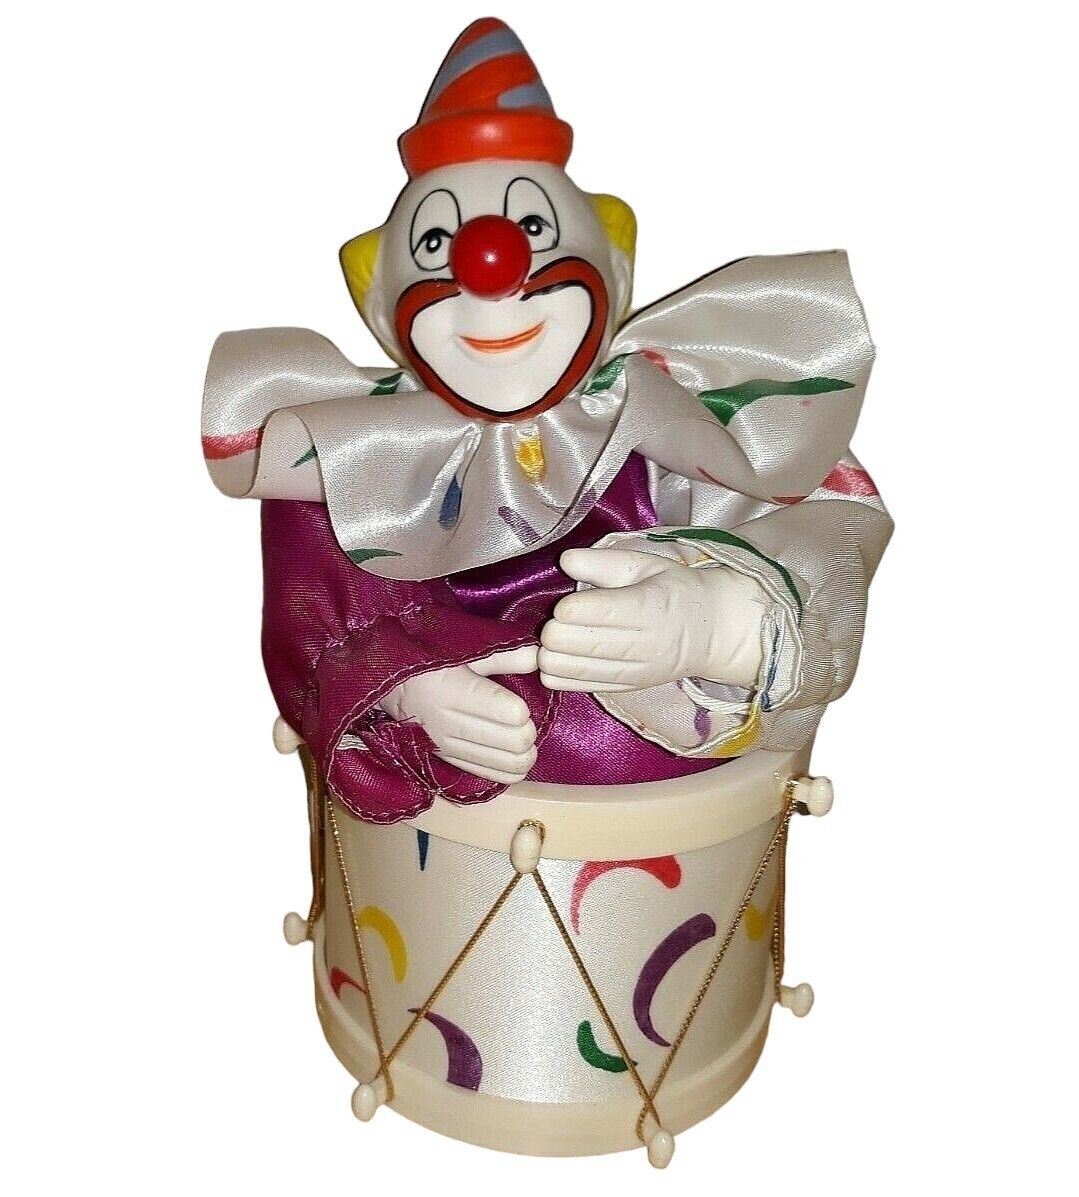 Vintage Musical Wind Up Circus Clown Moves In Snare Drum Plays Memories Taiwan 